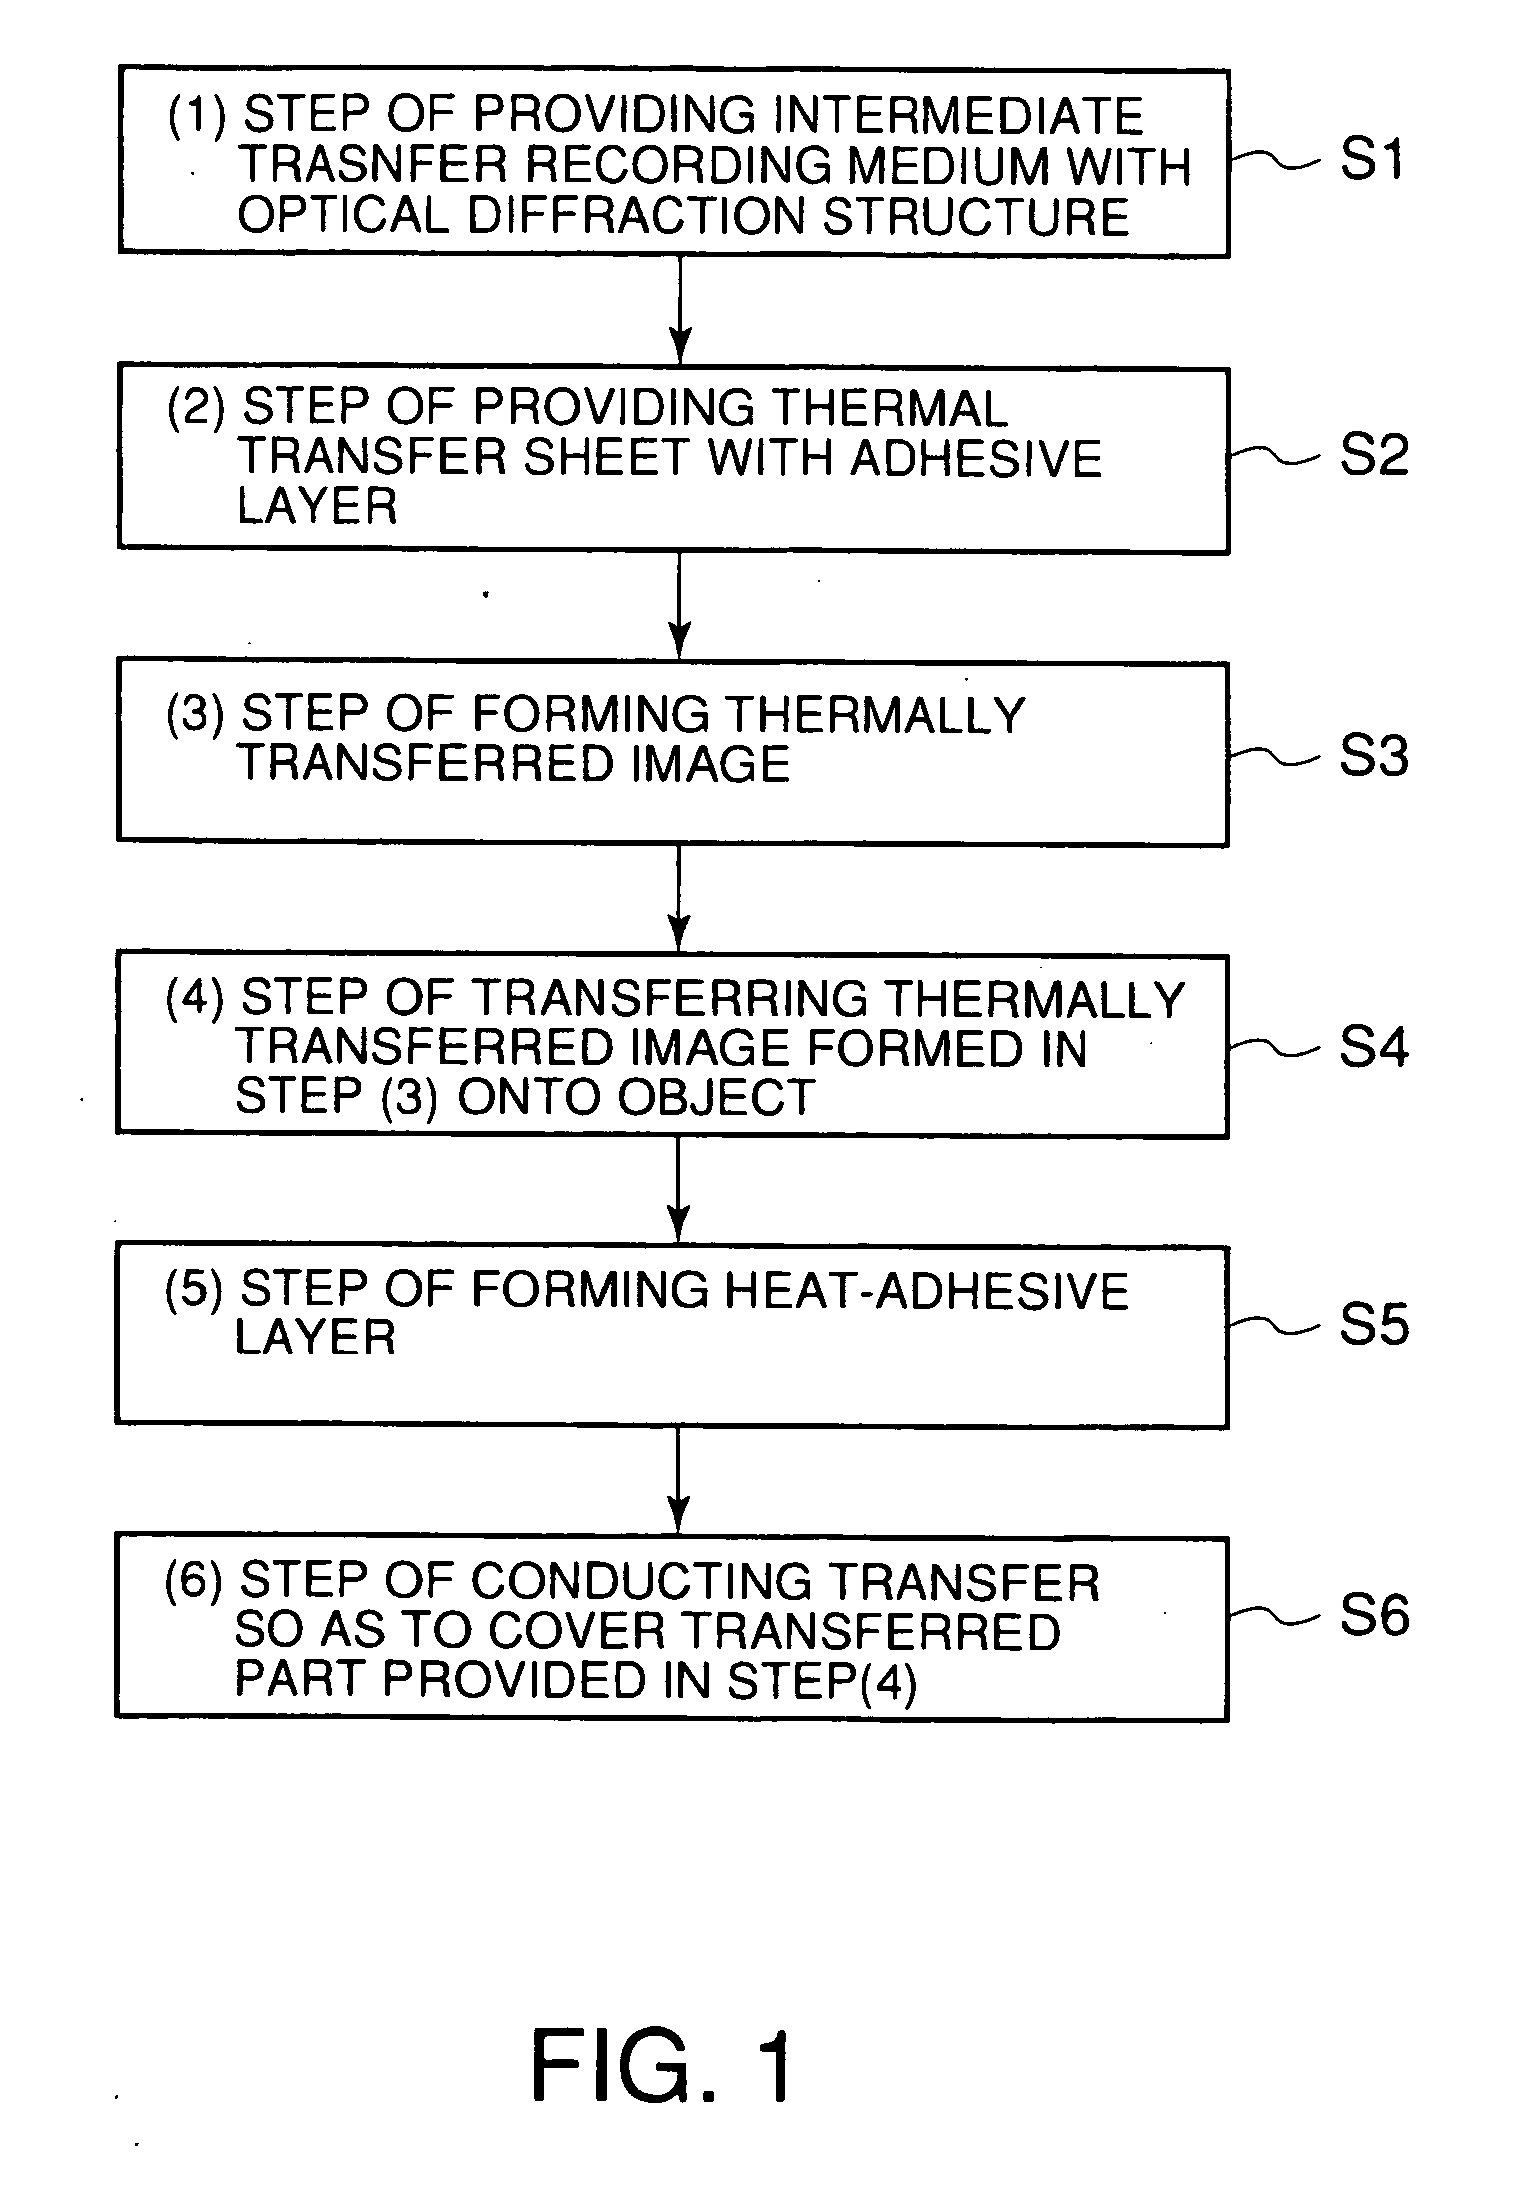 Method for image formation, intermediate transfer recording medium, and image formed object